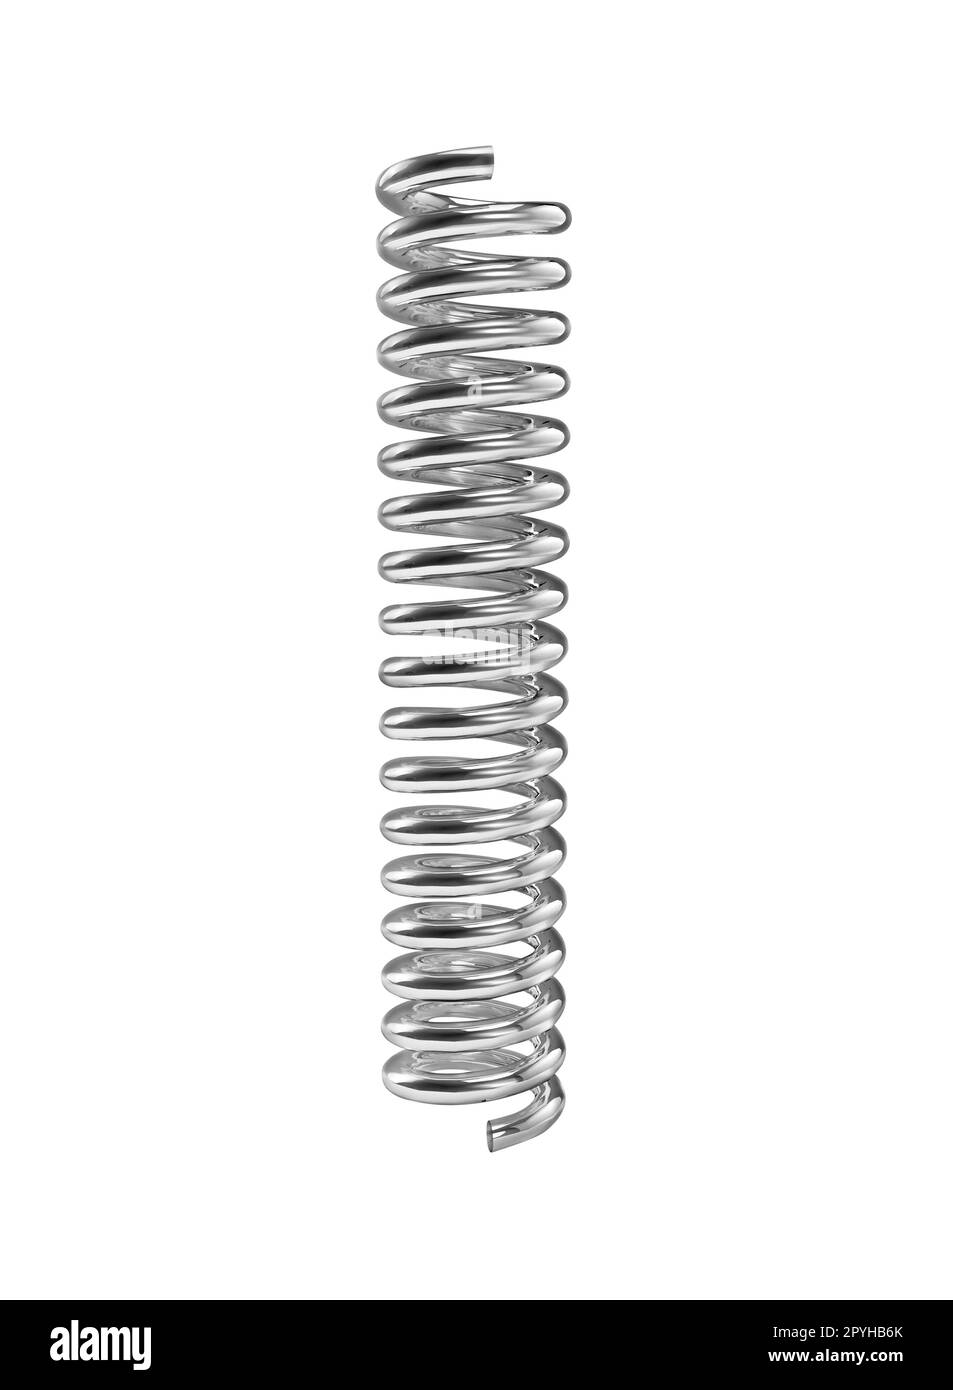 Silver color coil spring isolated over white background. 3D render Stock Photo